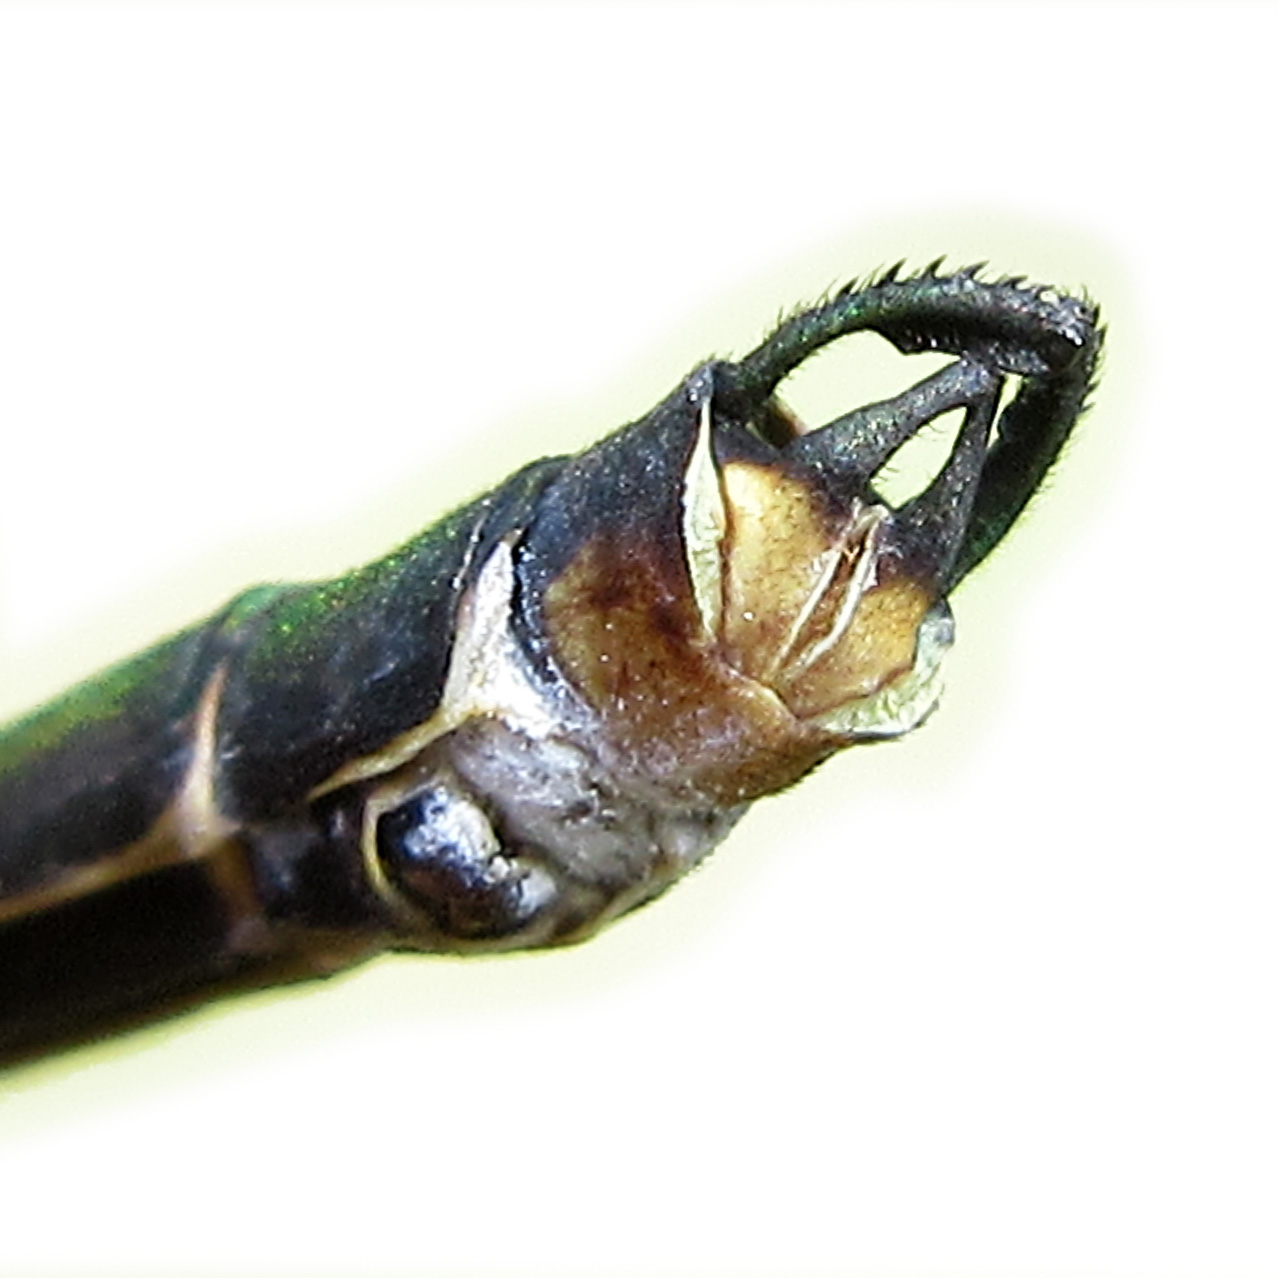 Neurobasis longipes Male appendages ventral view